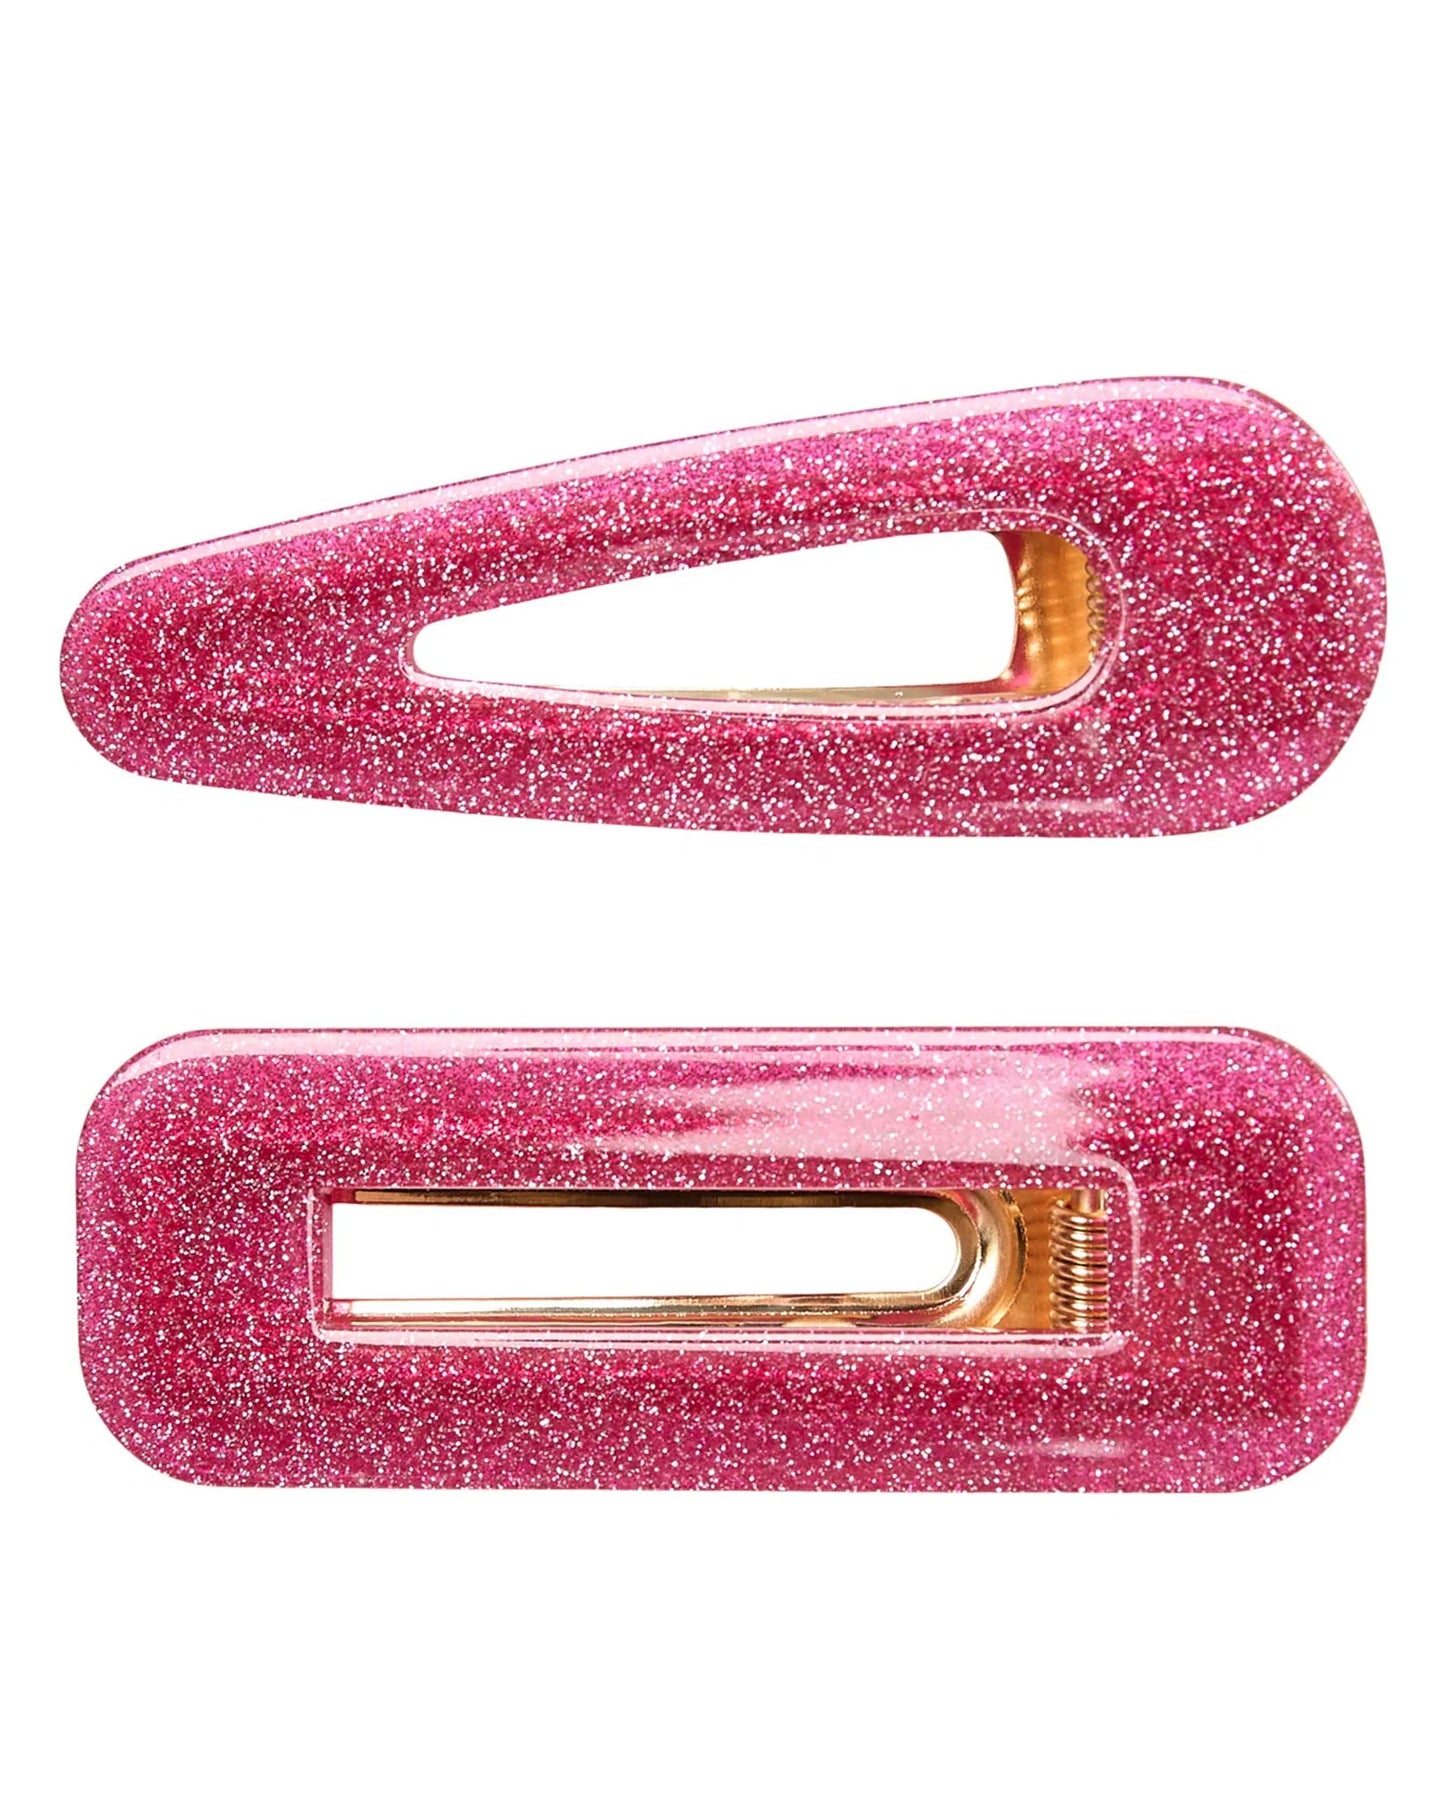 NUSOPHIN hair clip 2-pack strawberry moon